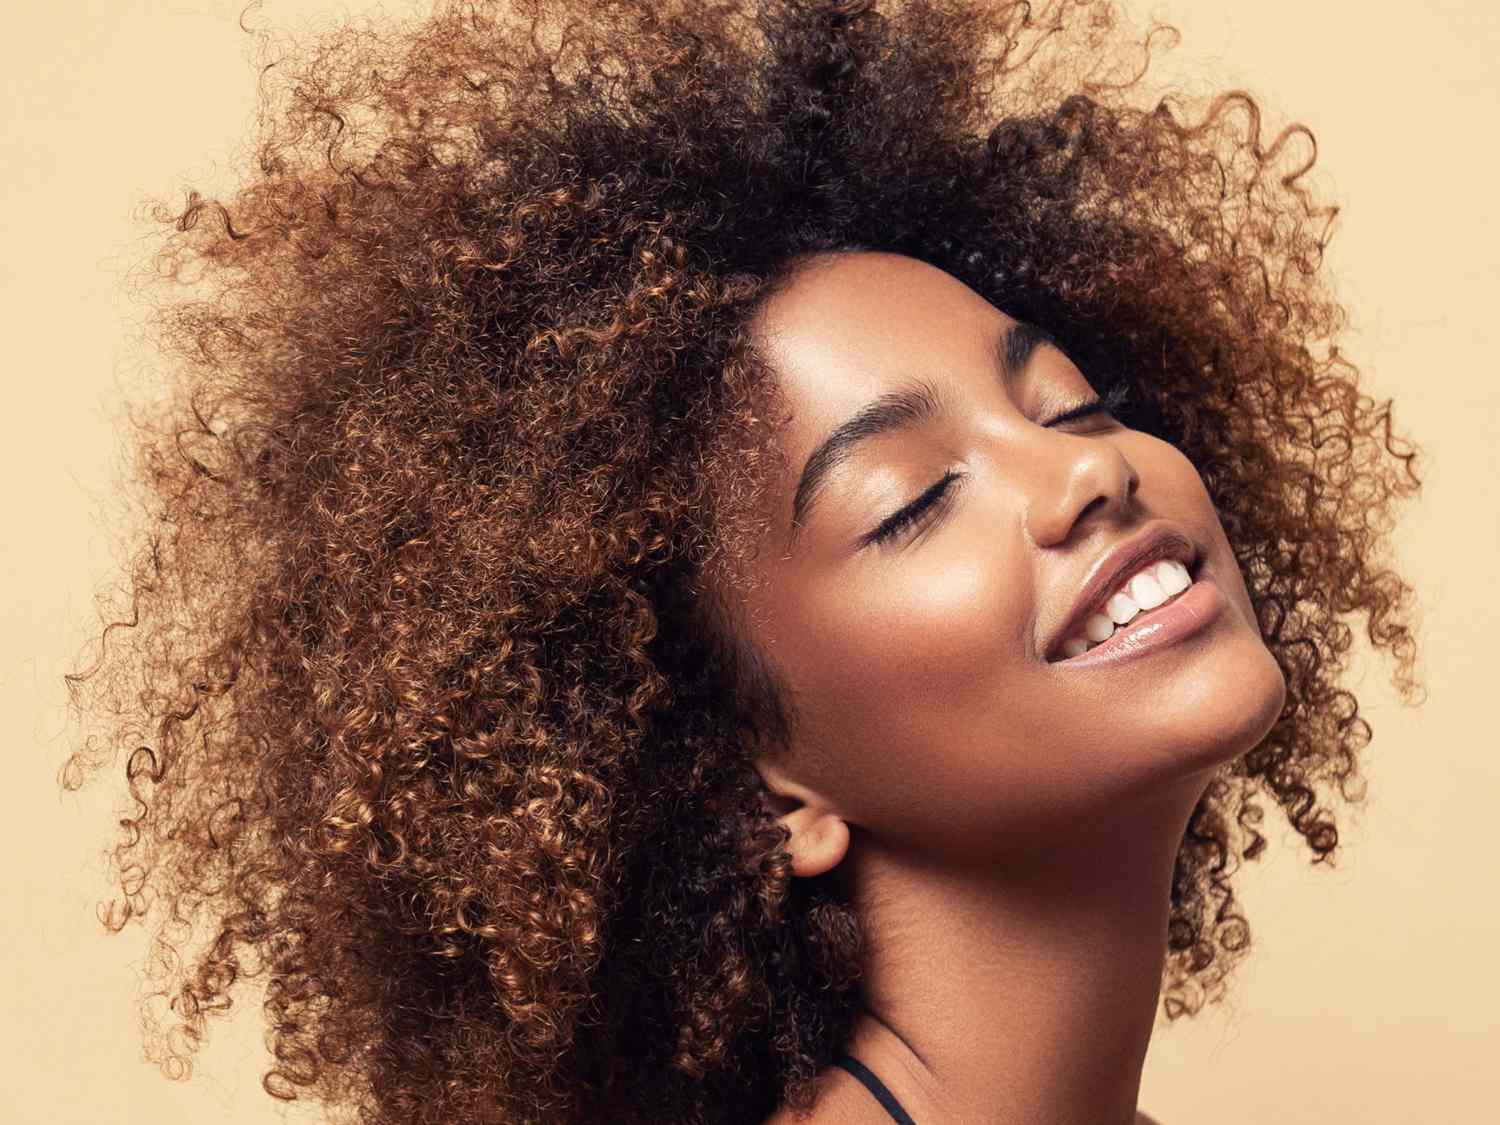 Natural Afro brown hair. Wide toothy smile and expression of gladness on the face of young brown skinned woman. Afro beauty.